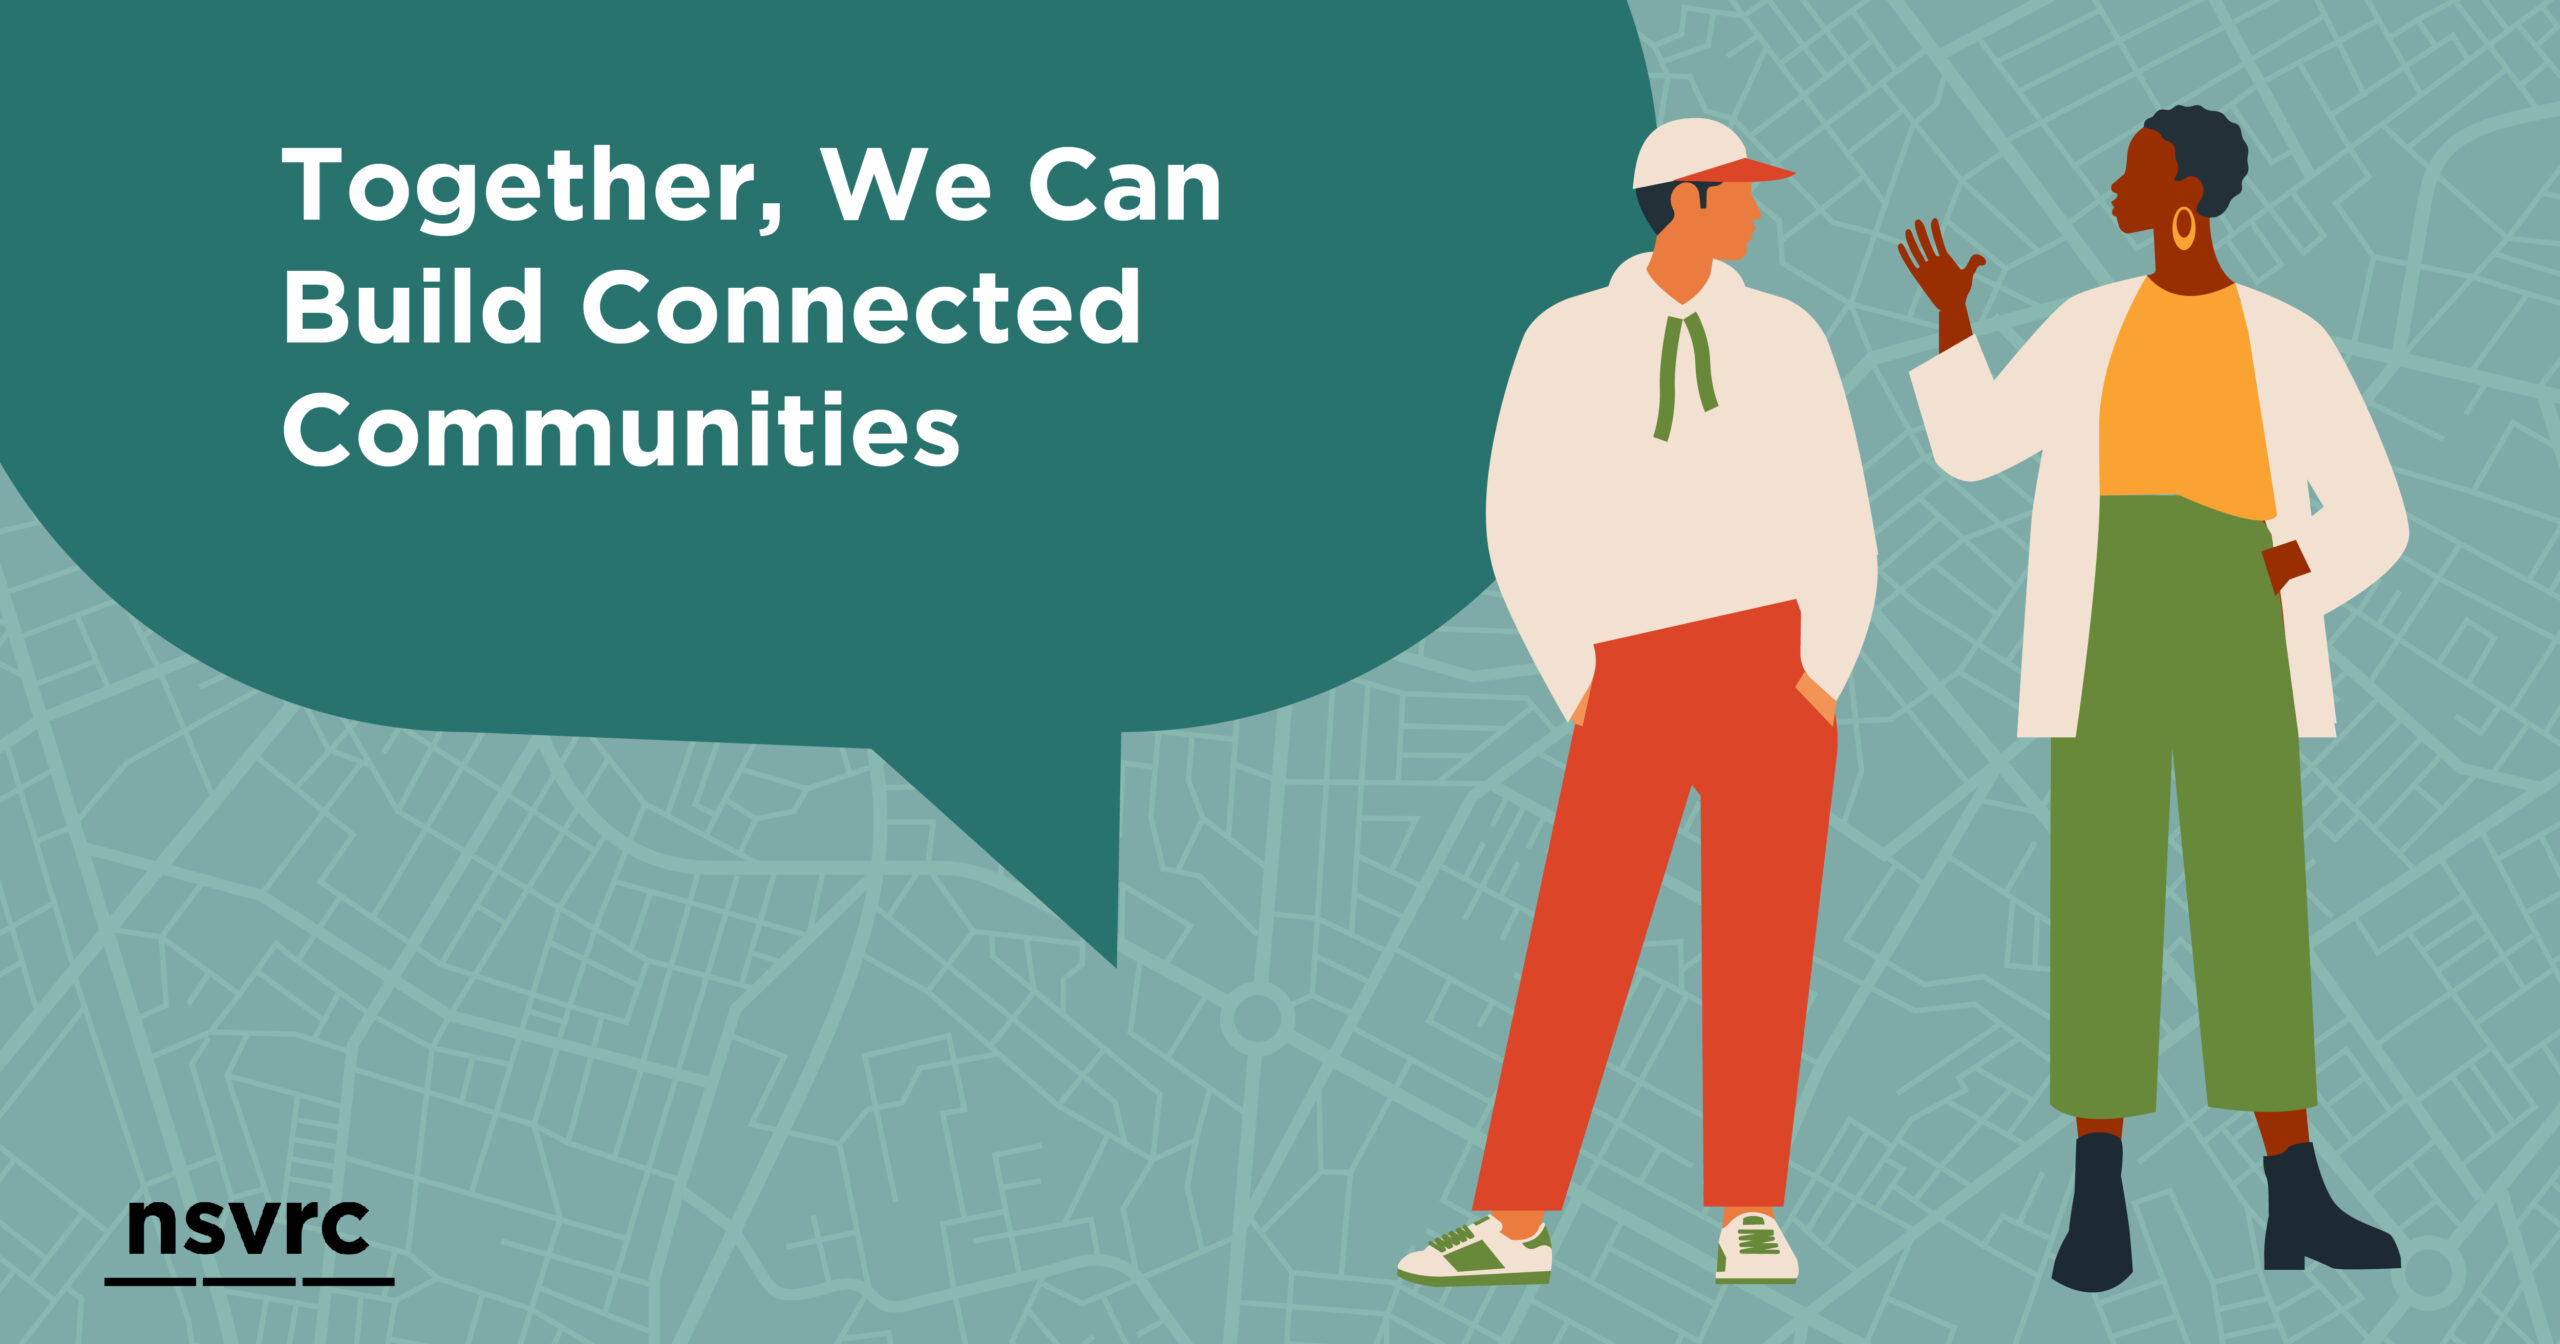 Together we can build connected communities, green graphic with illustrated people talking